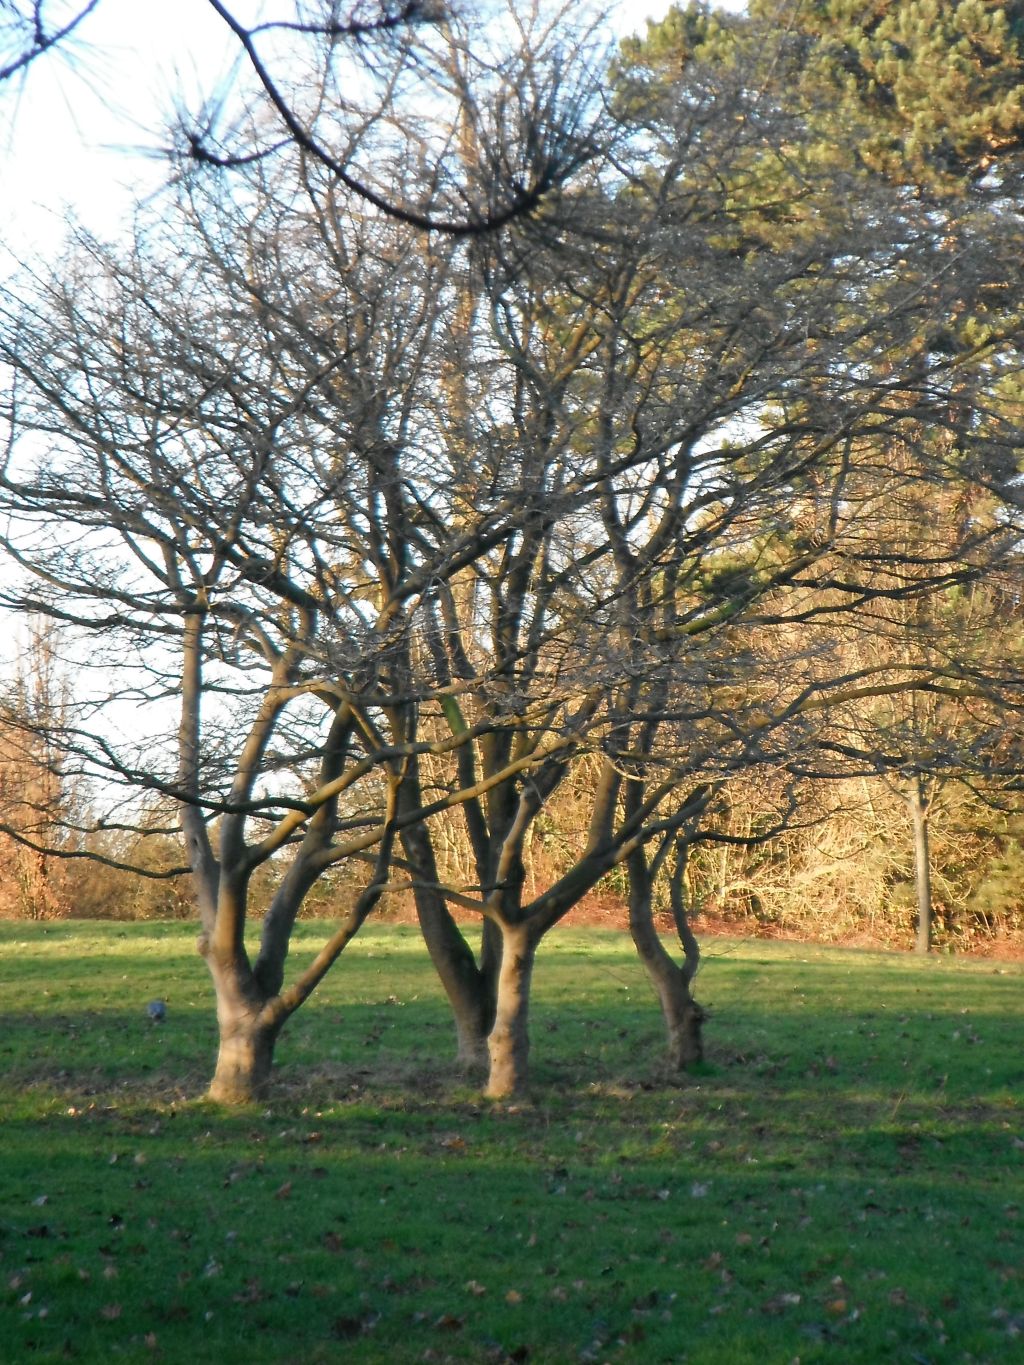 photo taken by me - trees in Bruntwood Park, Manchester 